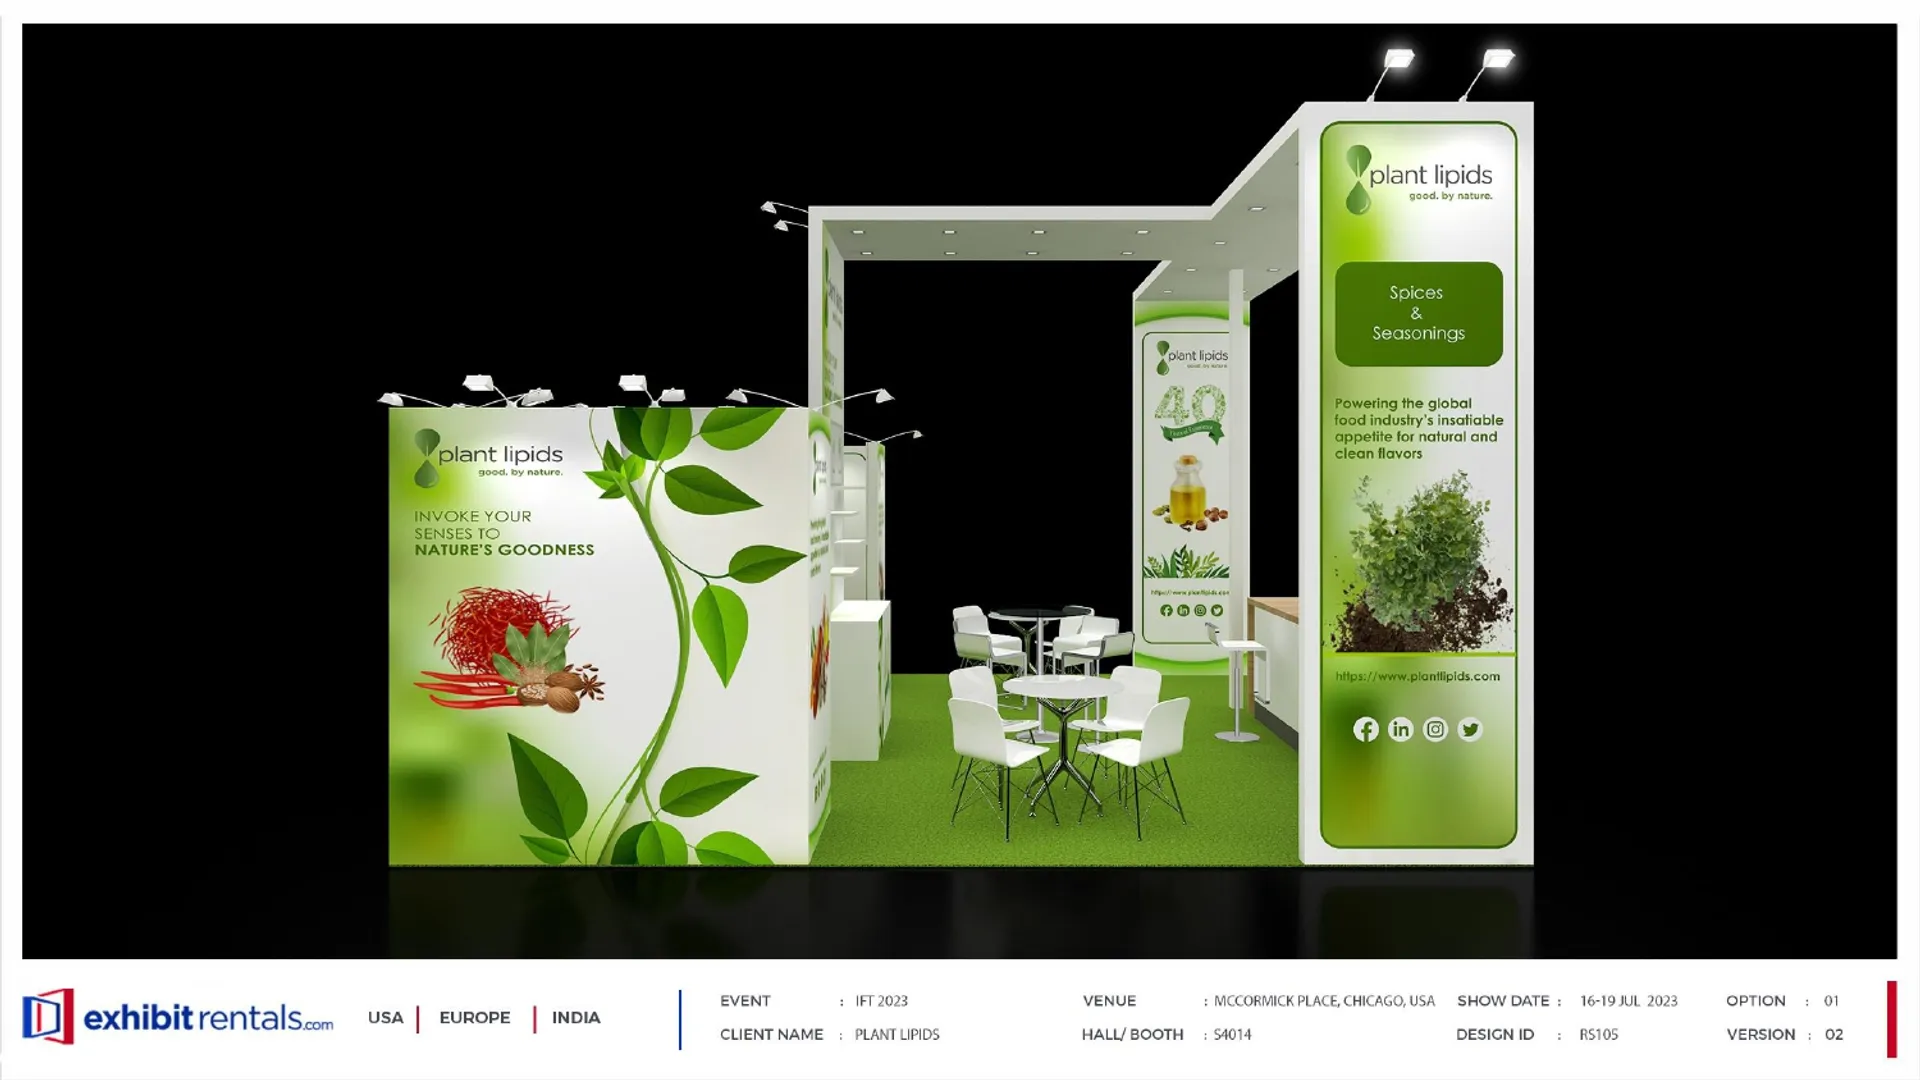 booth-design-projects/Exhibit-Rentals/2024-04-17-20x20-ISLAND-Project-105/1.2_Plant Lipids_IFT 2023_ER design presentation -11_page-0001-fexjlp.jpg